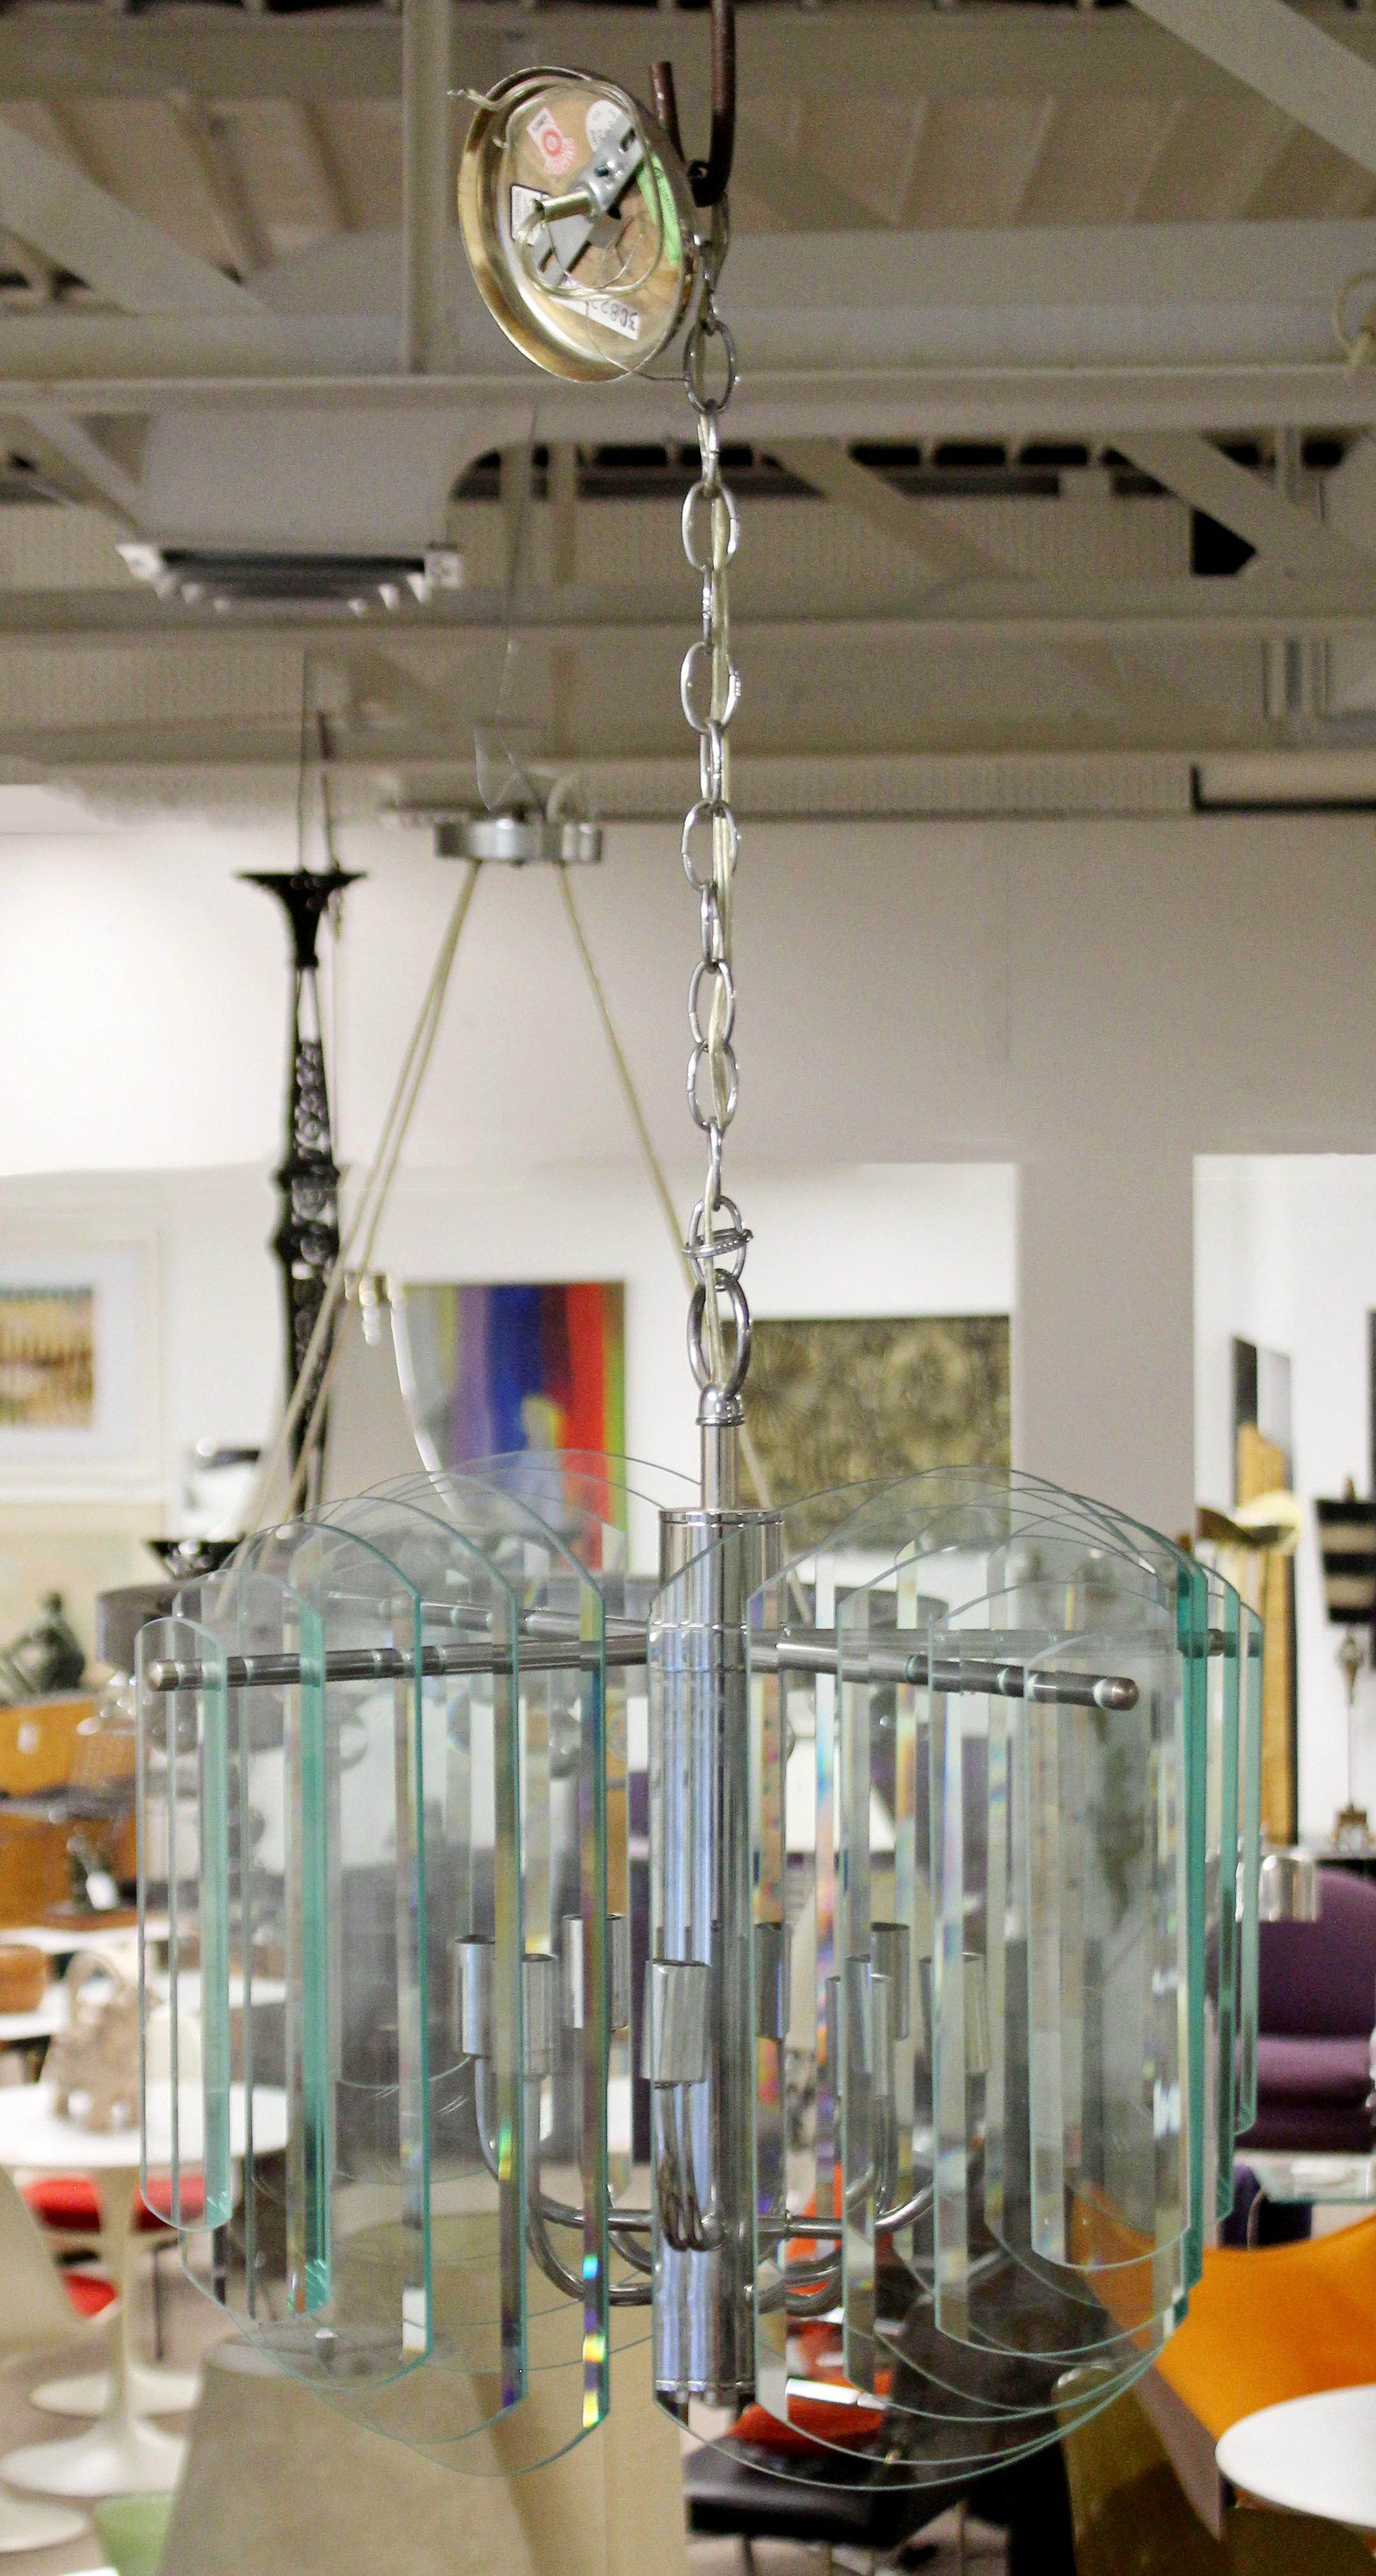 For your consideration is a majestic looking, multi layered glass and chrome chandelier by Luminaire. In excellent condition. The dimensions are 21